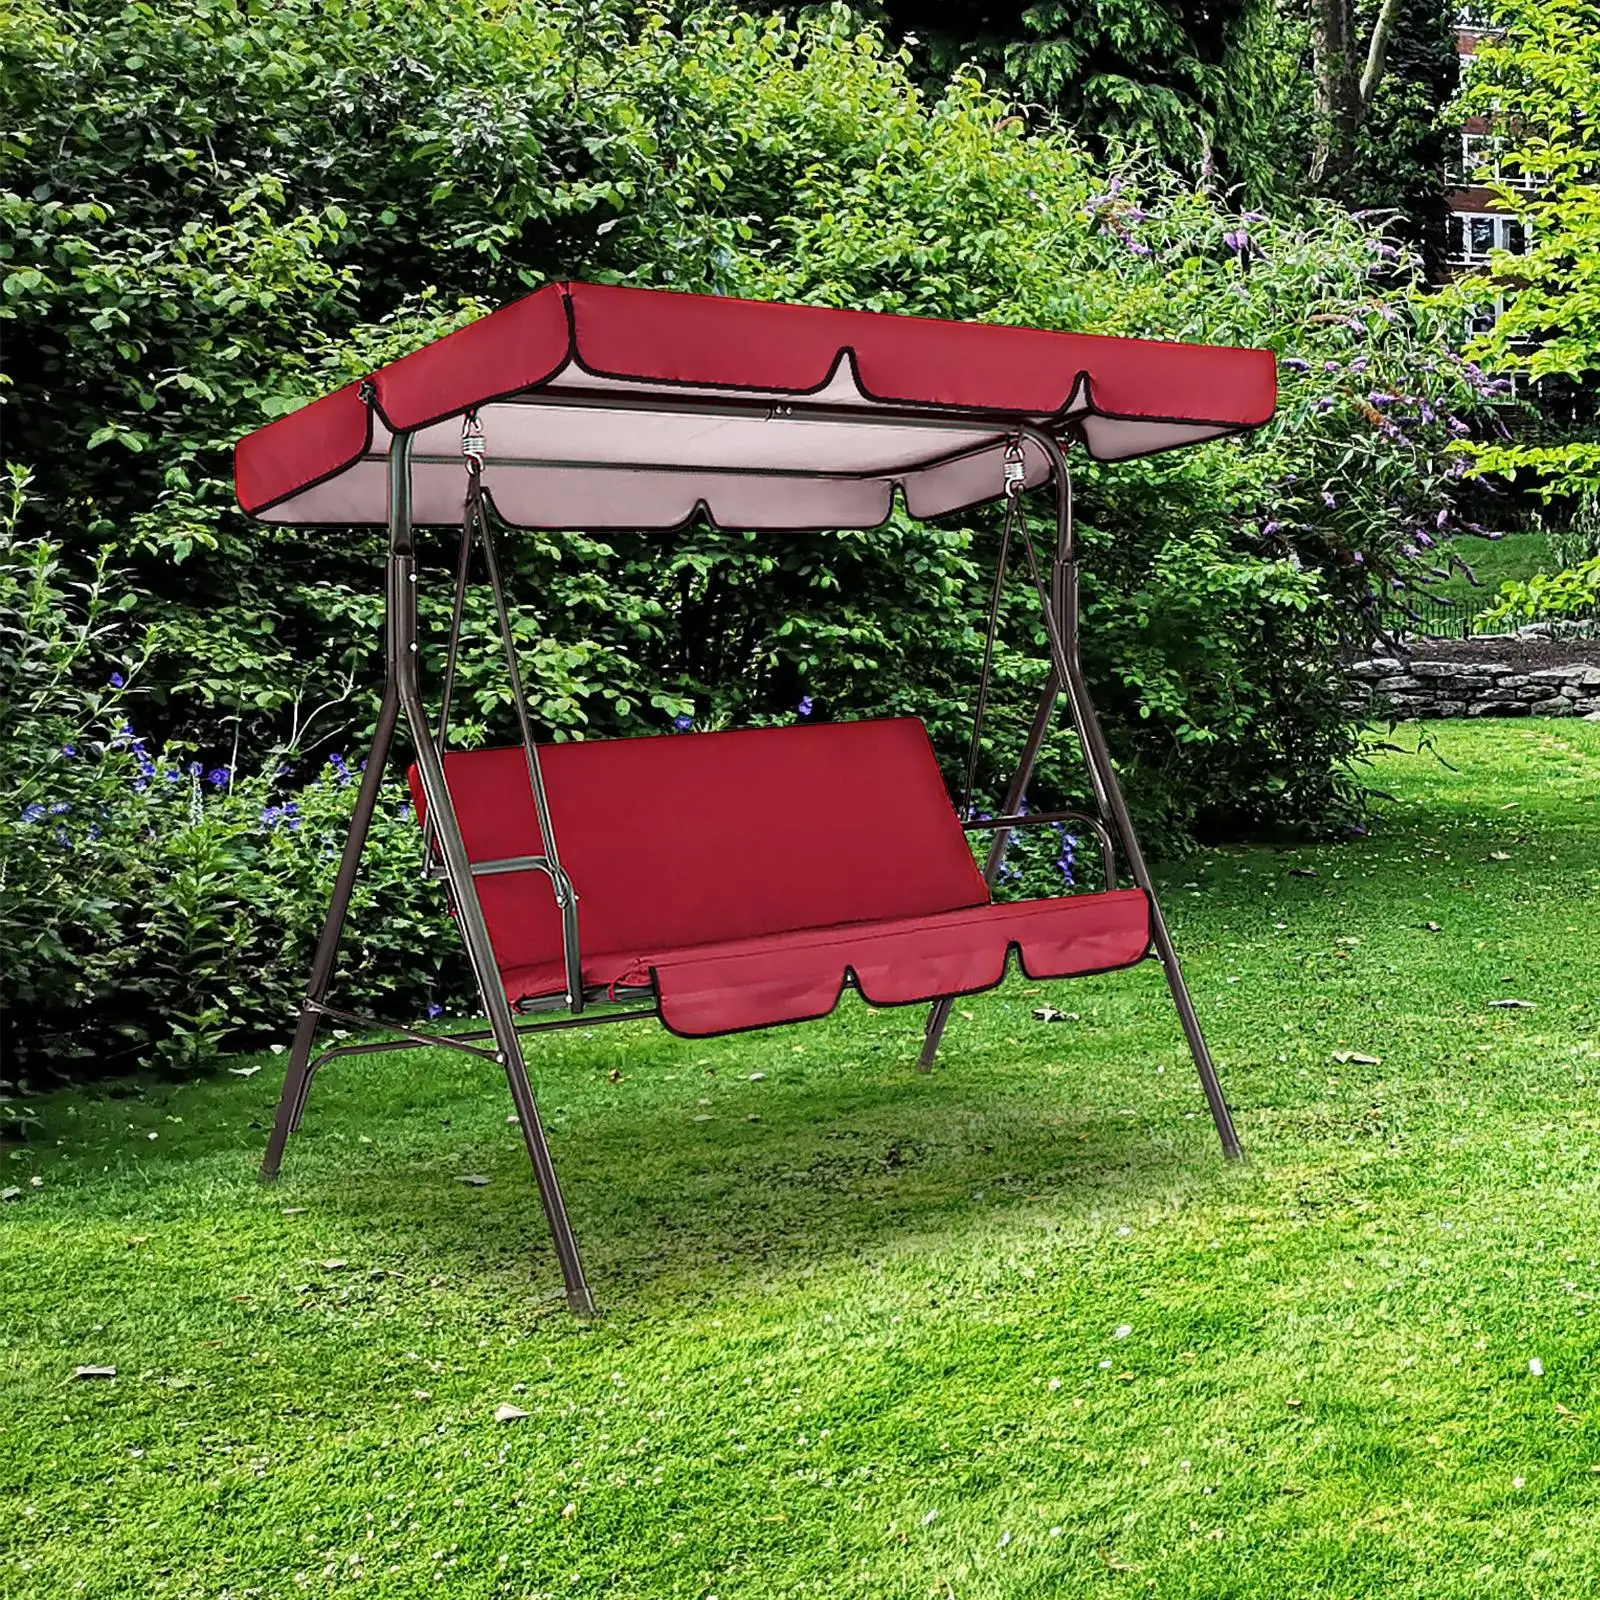 Patio Swing Canopy Windproof Durable Rainproof 3 Seater Garden Swing Seat Canopy Cover for Swing Porch Seat Yard Outdoor